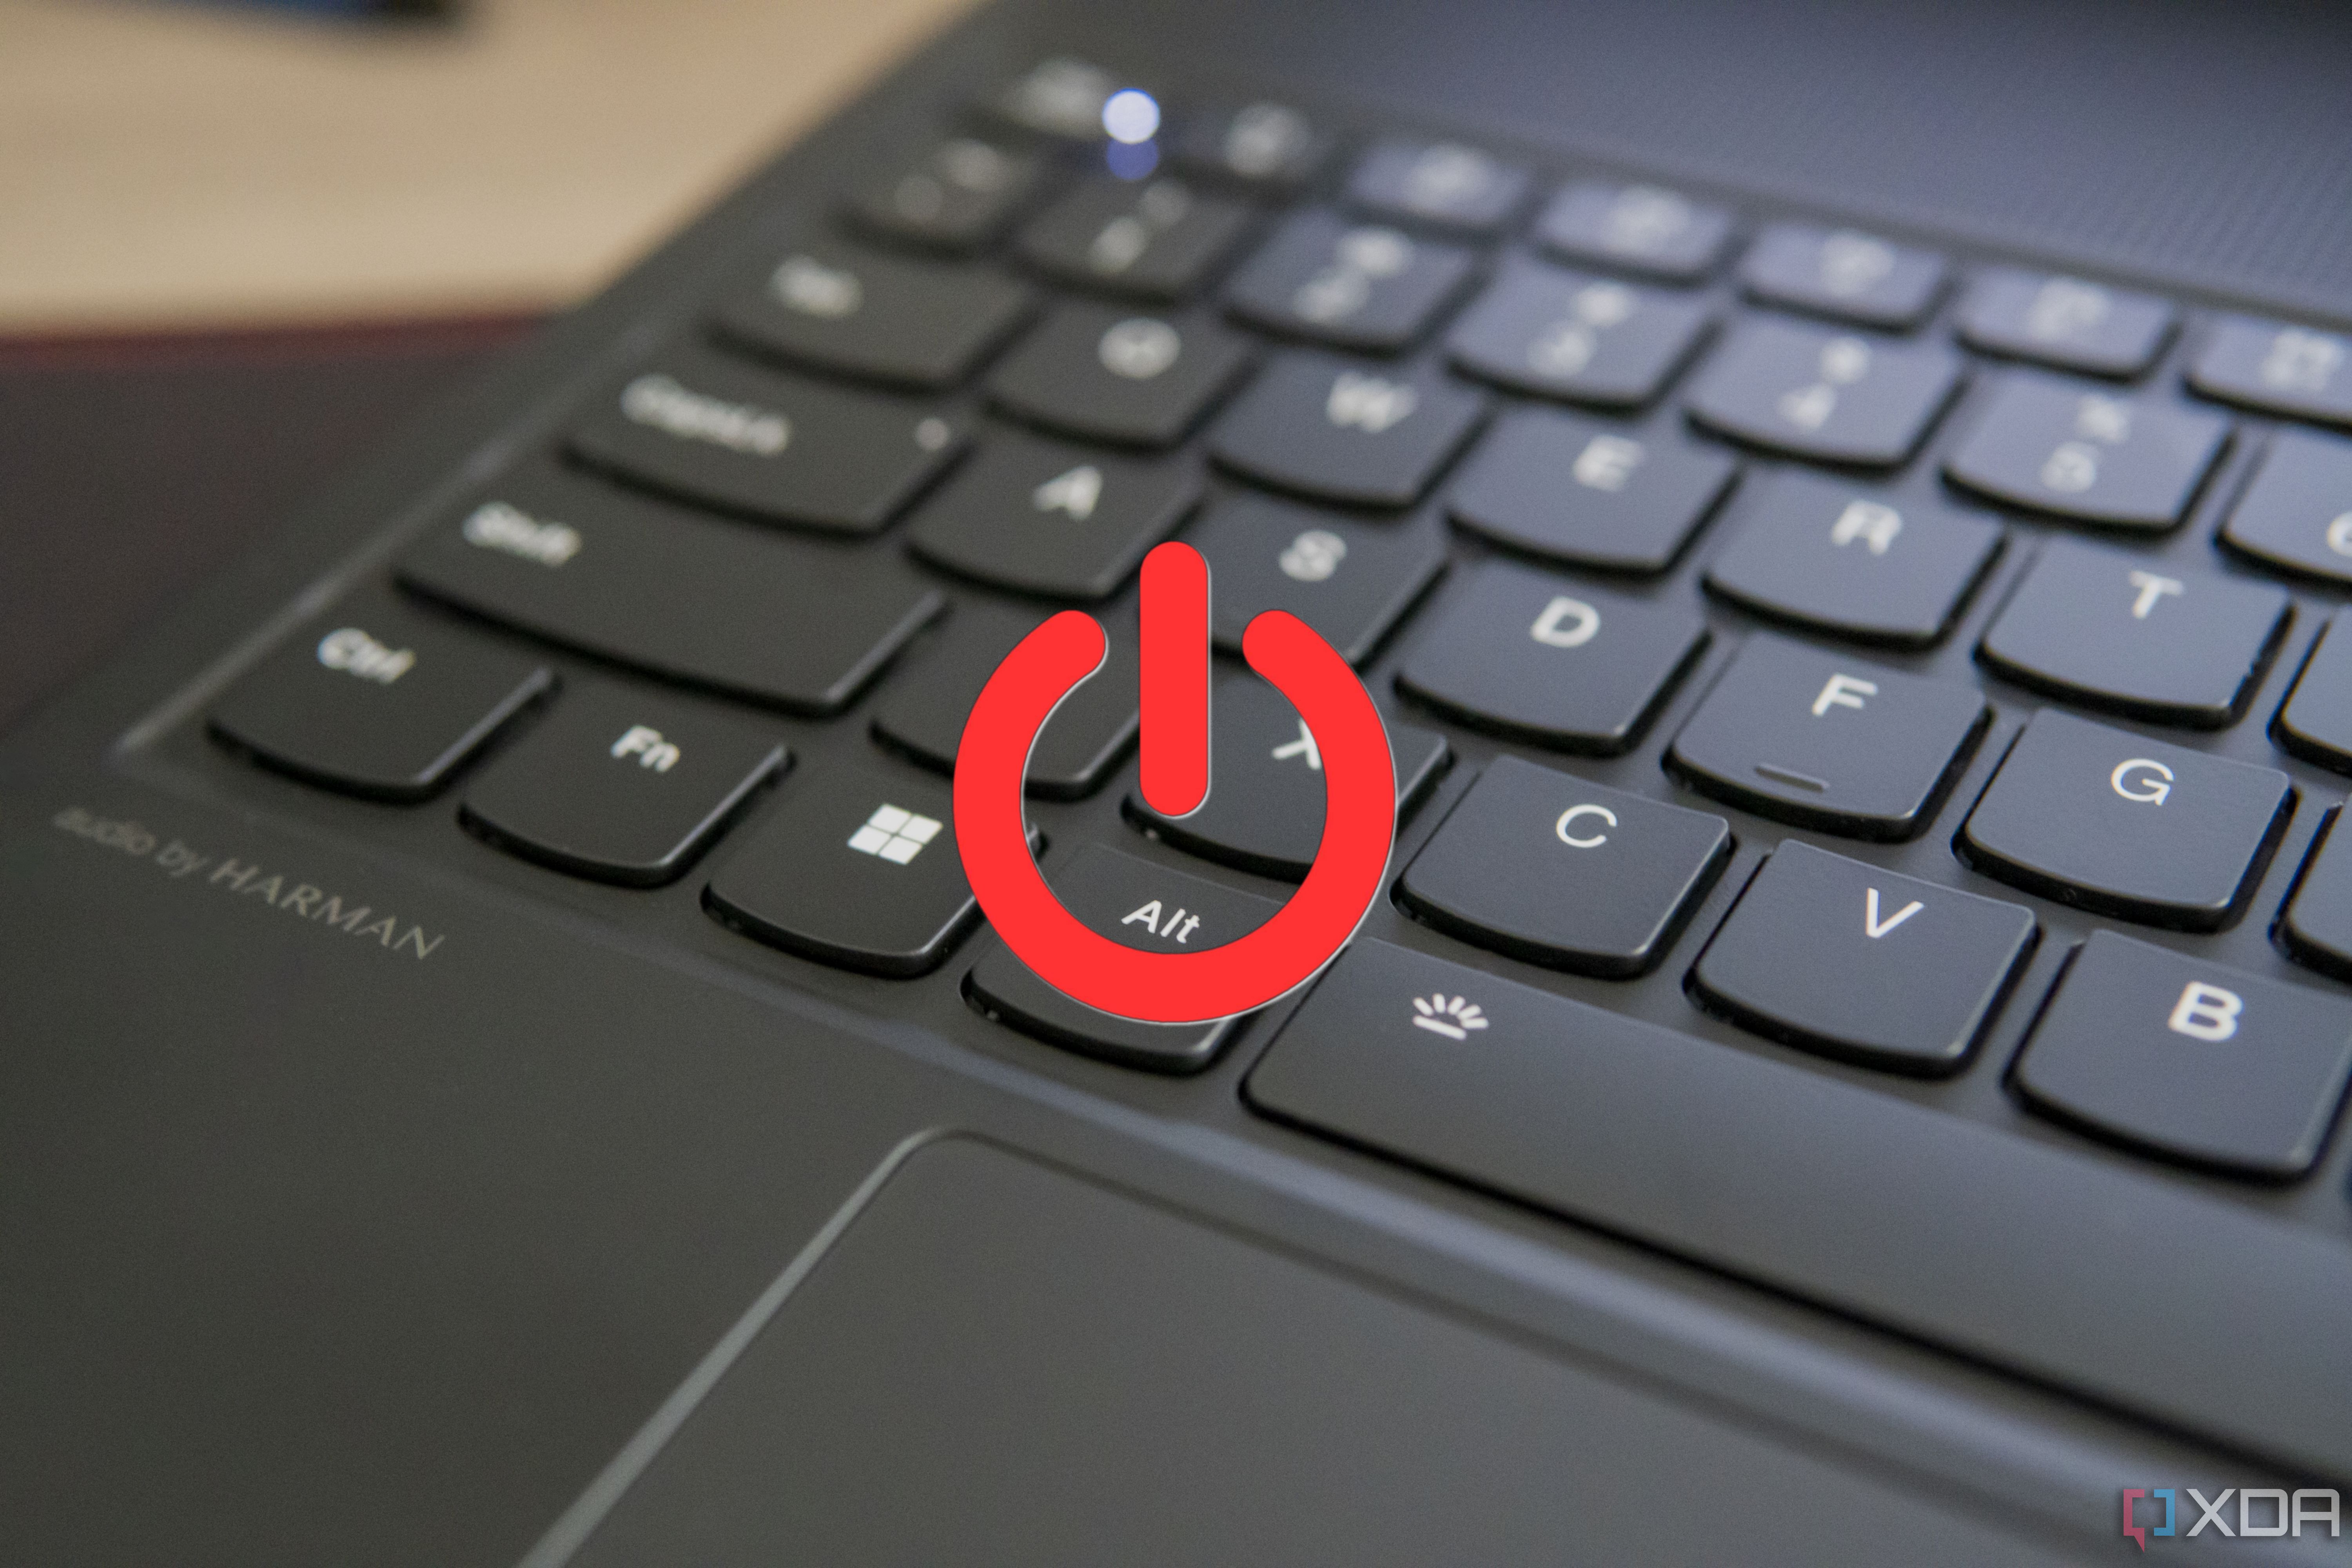 Close-up view of a laptop keyboard with a power icon overlaid on top